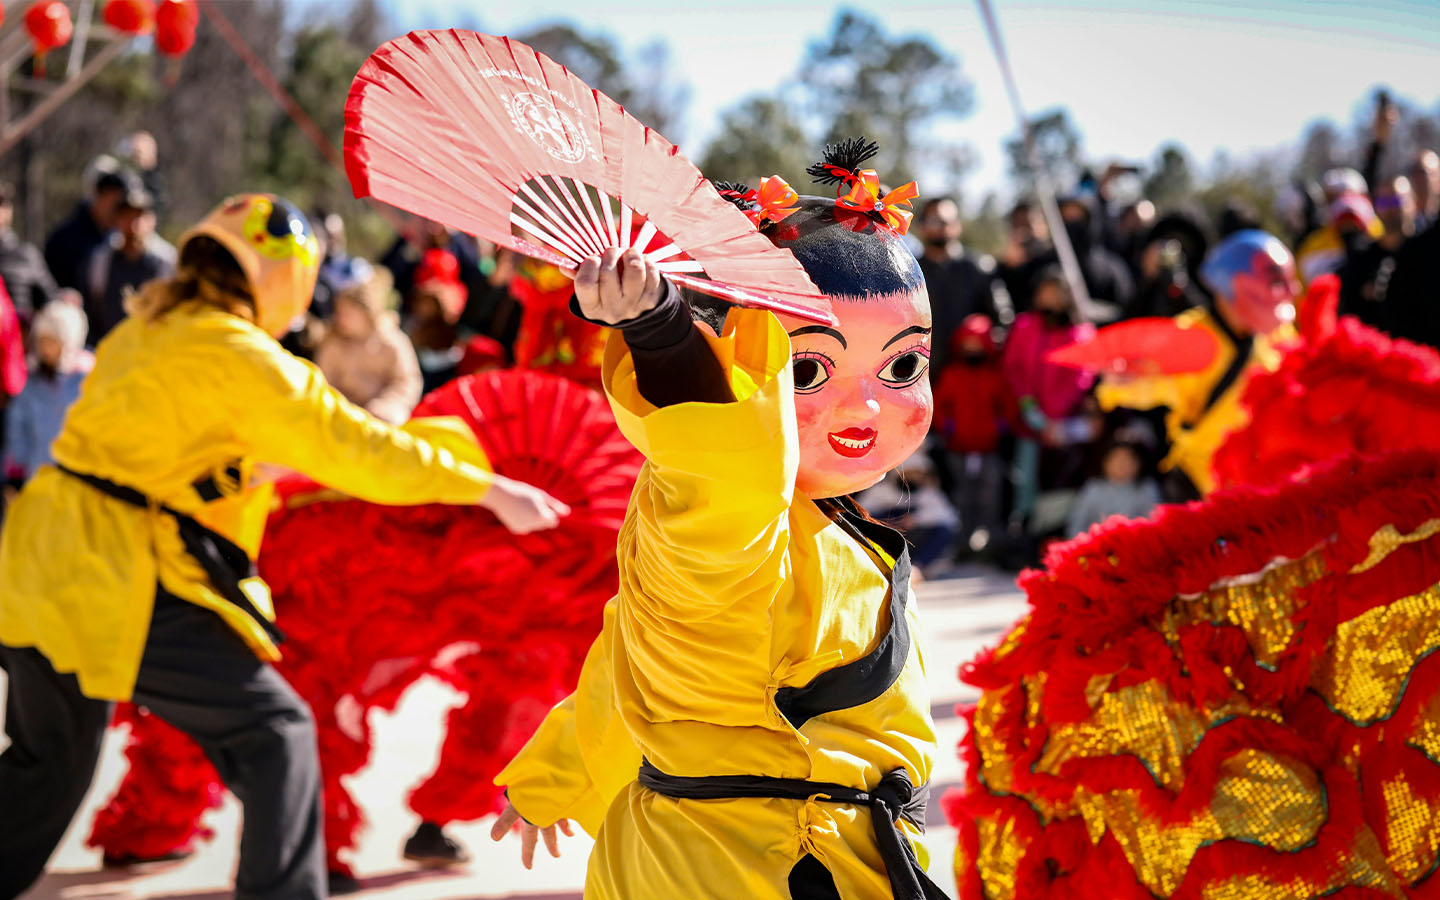 Preparations for the Chinese New Year parades are in full swing